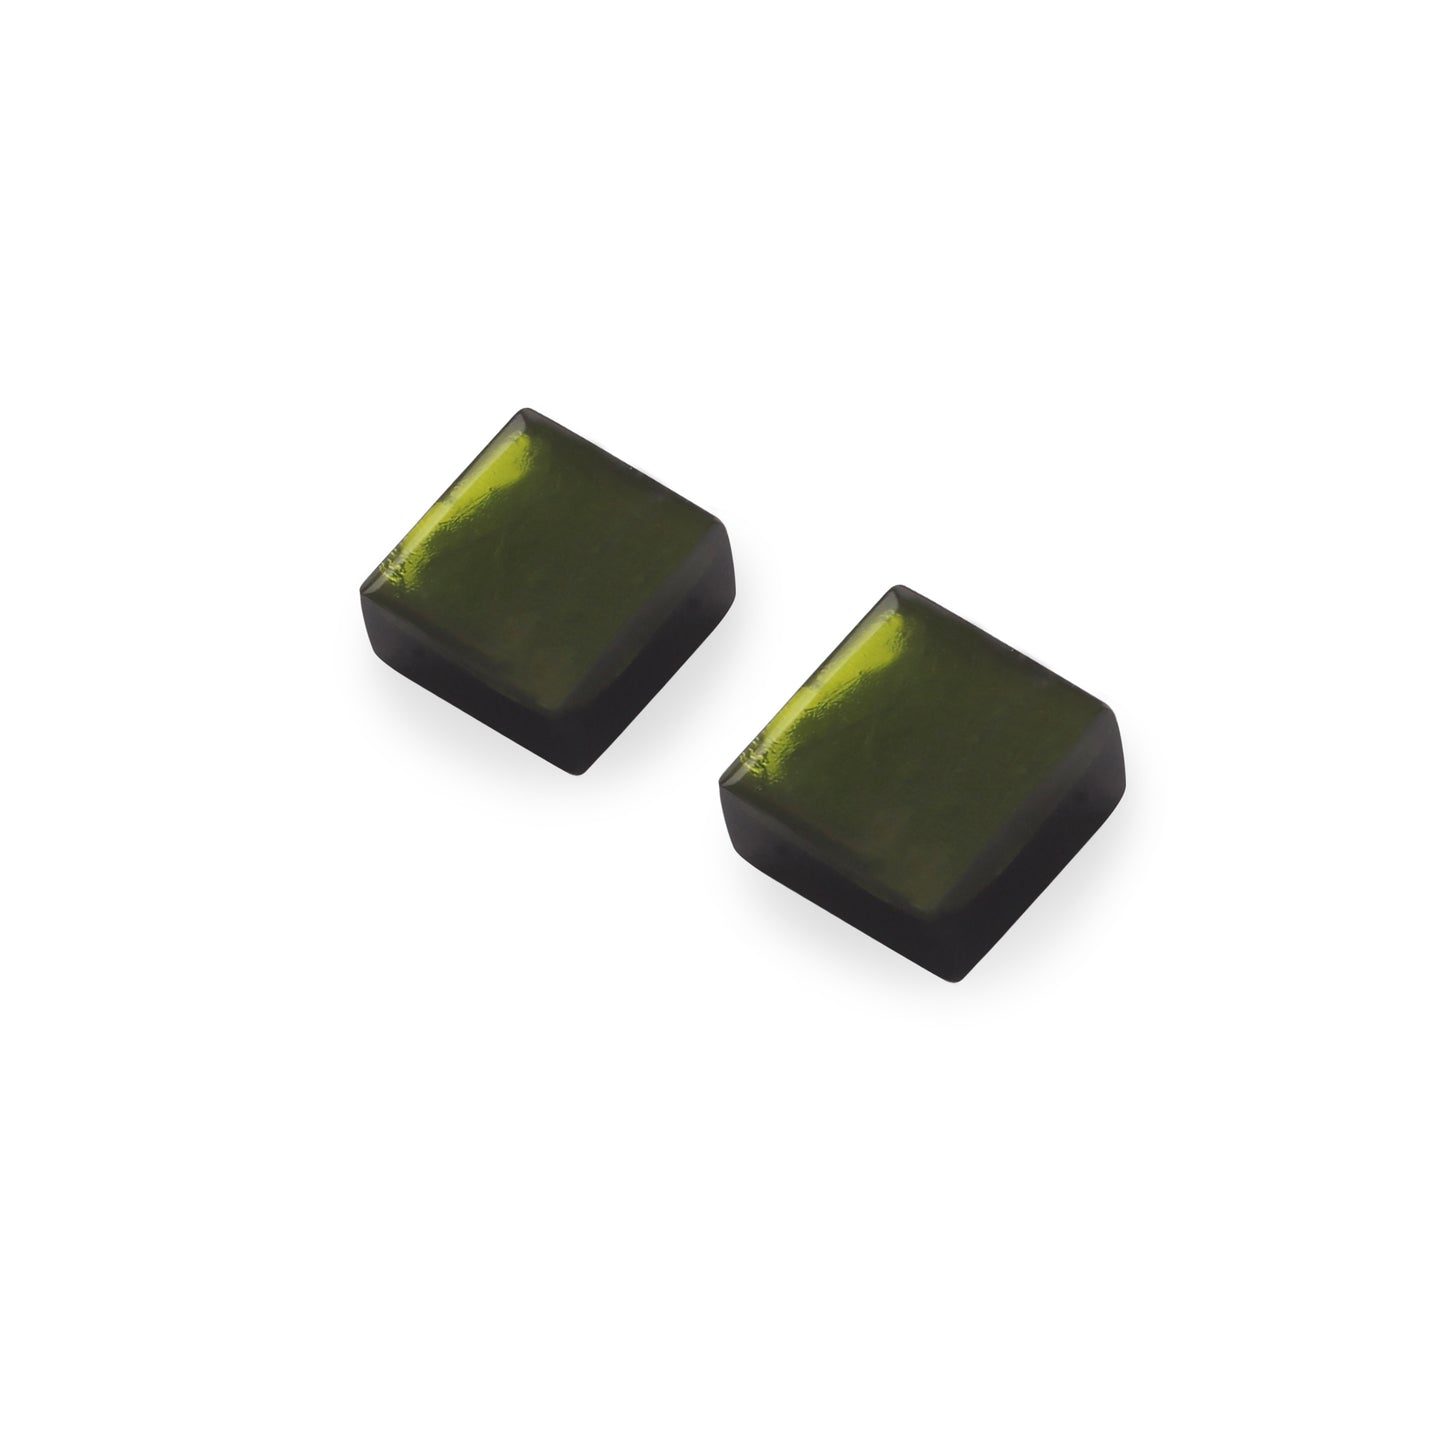 Olive Square Buttons Shiny Stud Earrings